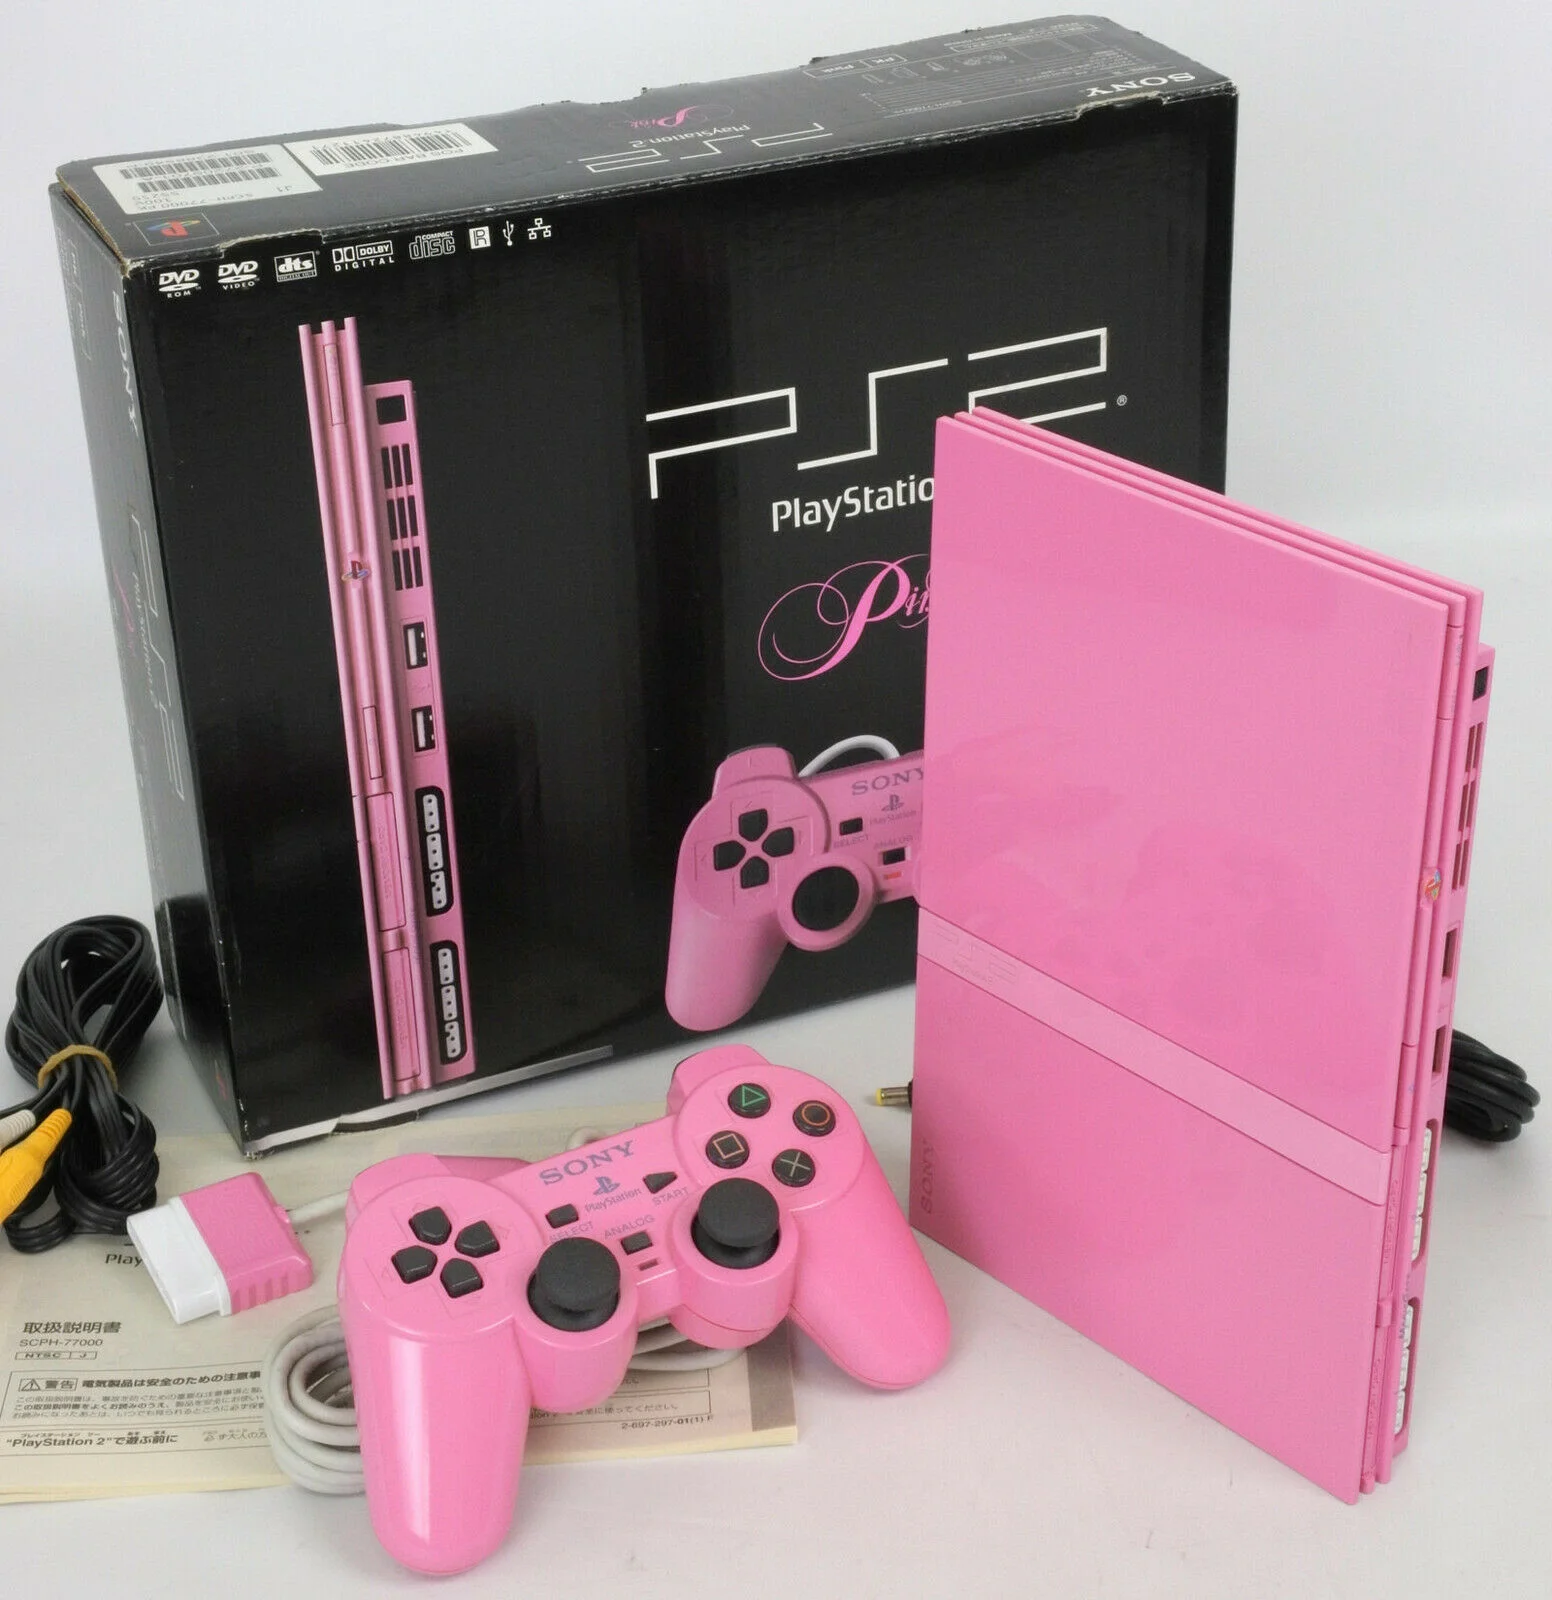  Sony PlayStation 2 Slim Pink Console [JP]